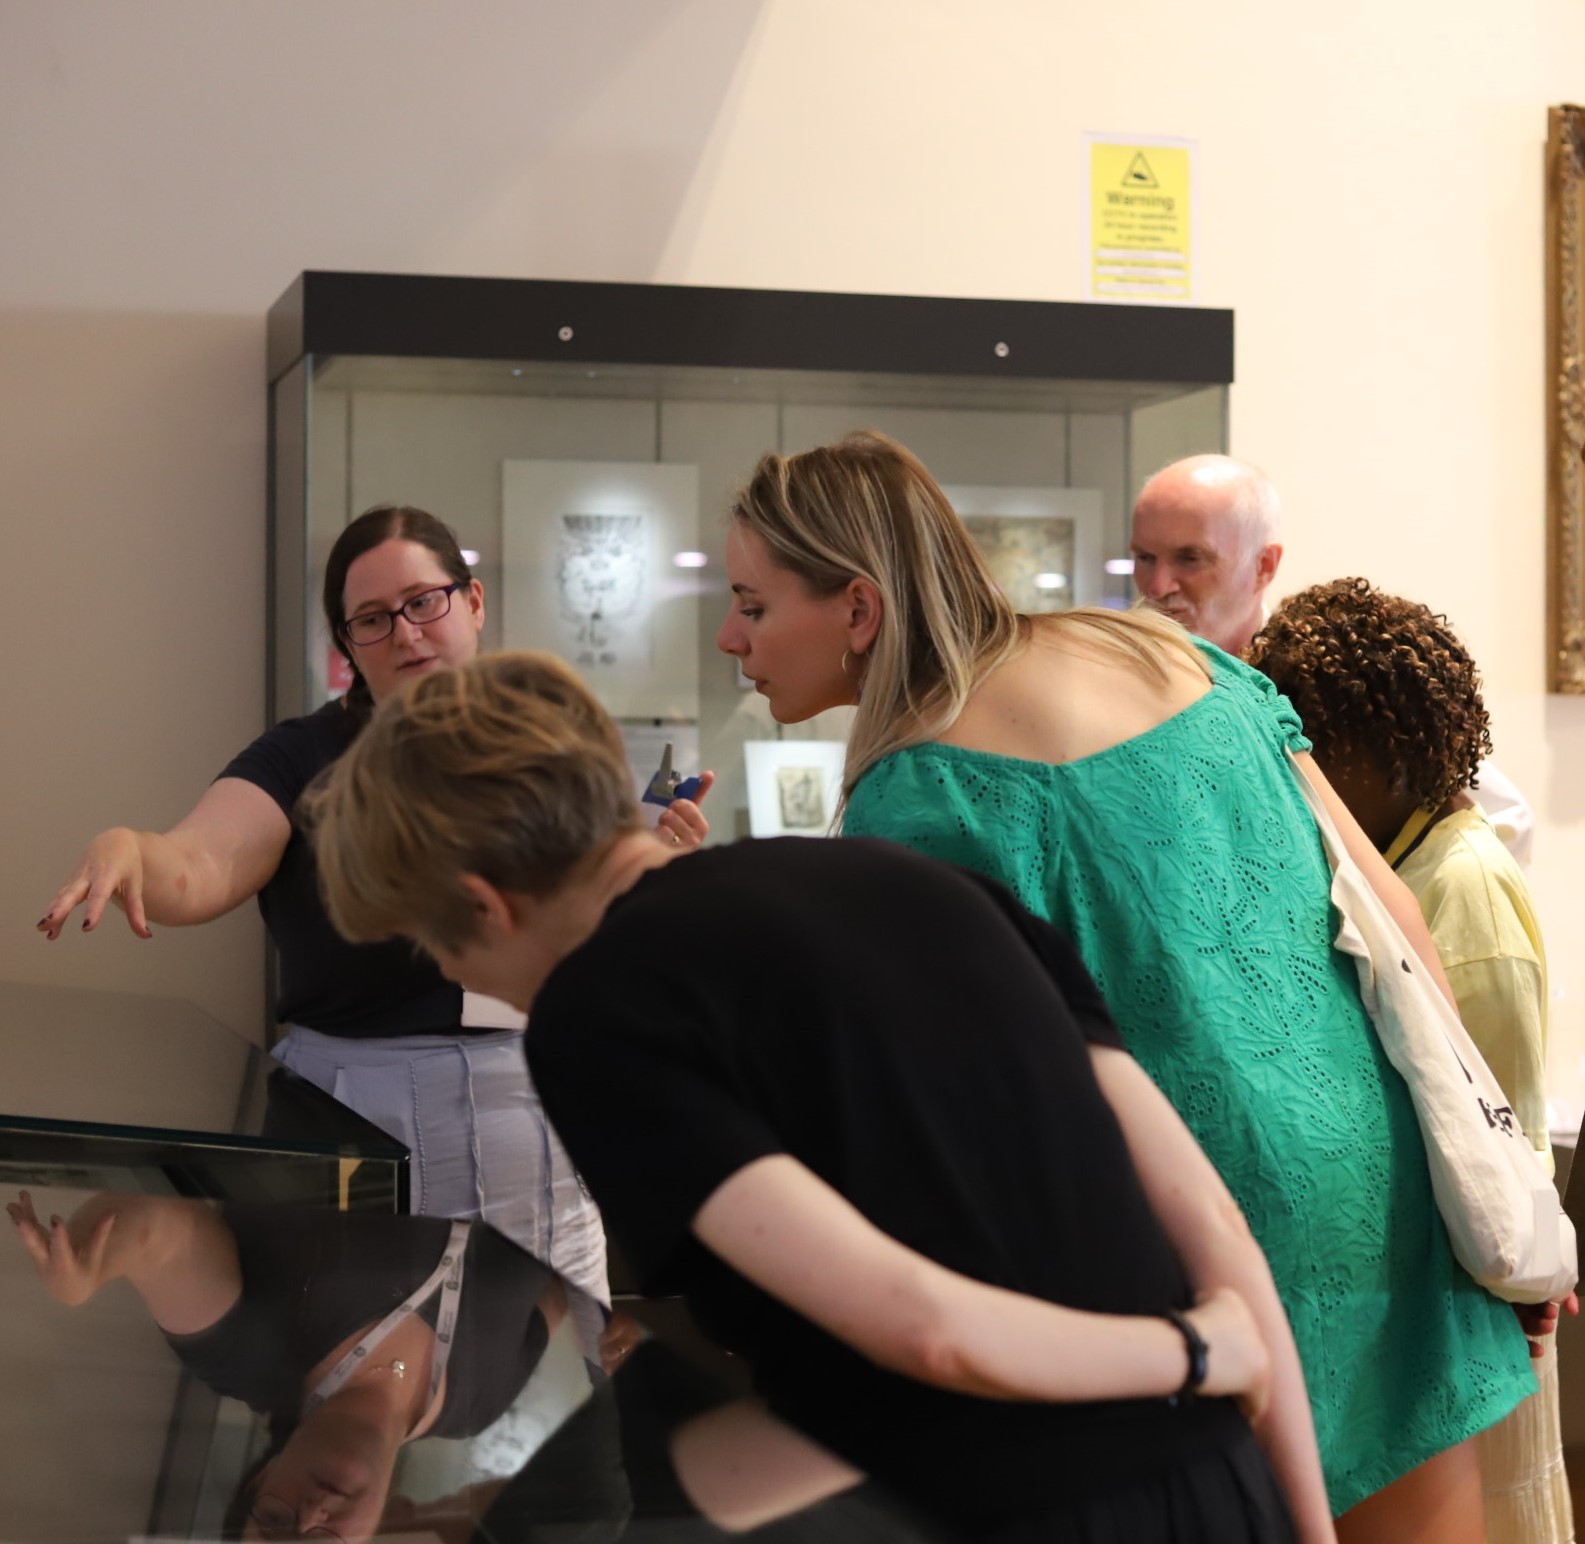 Visitors lean over a display case.